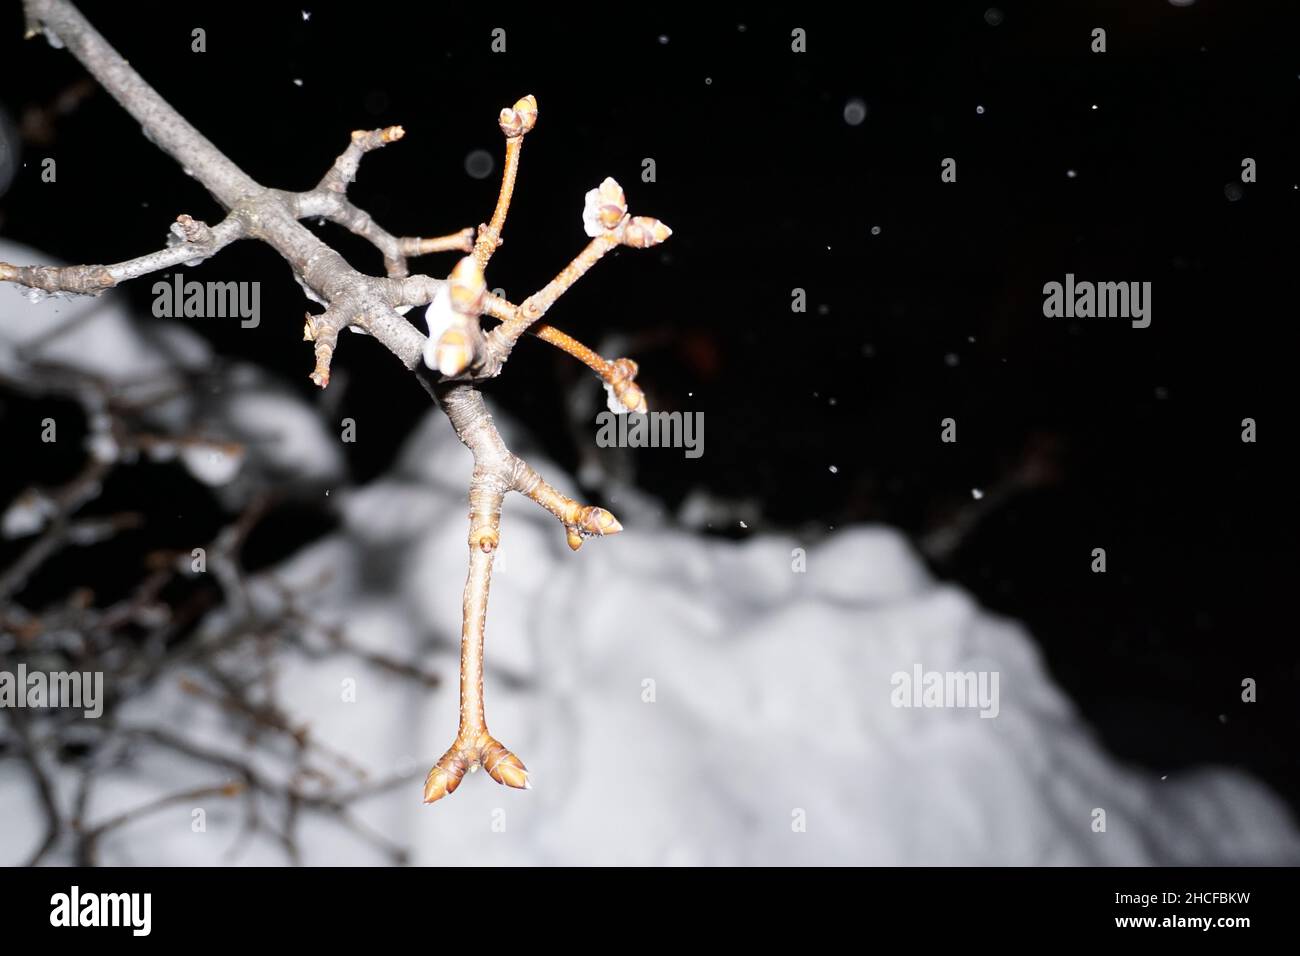 Close up by night of resilient life growing under hard circumstances in the coldness of a swiss winter. Stock Photo